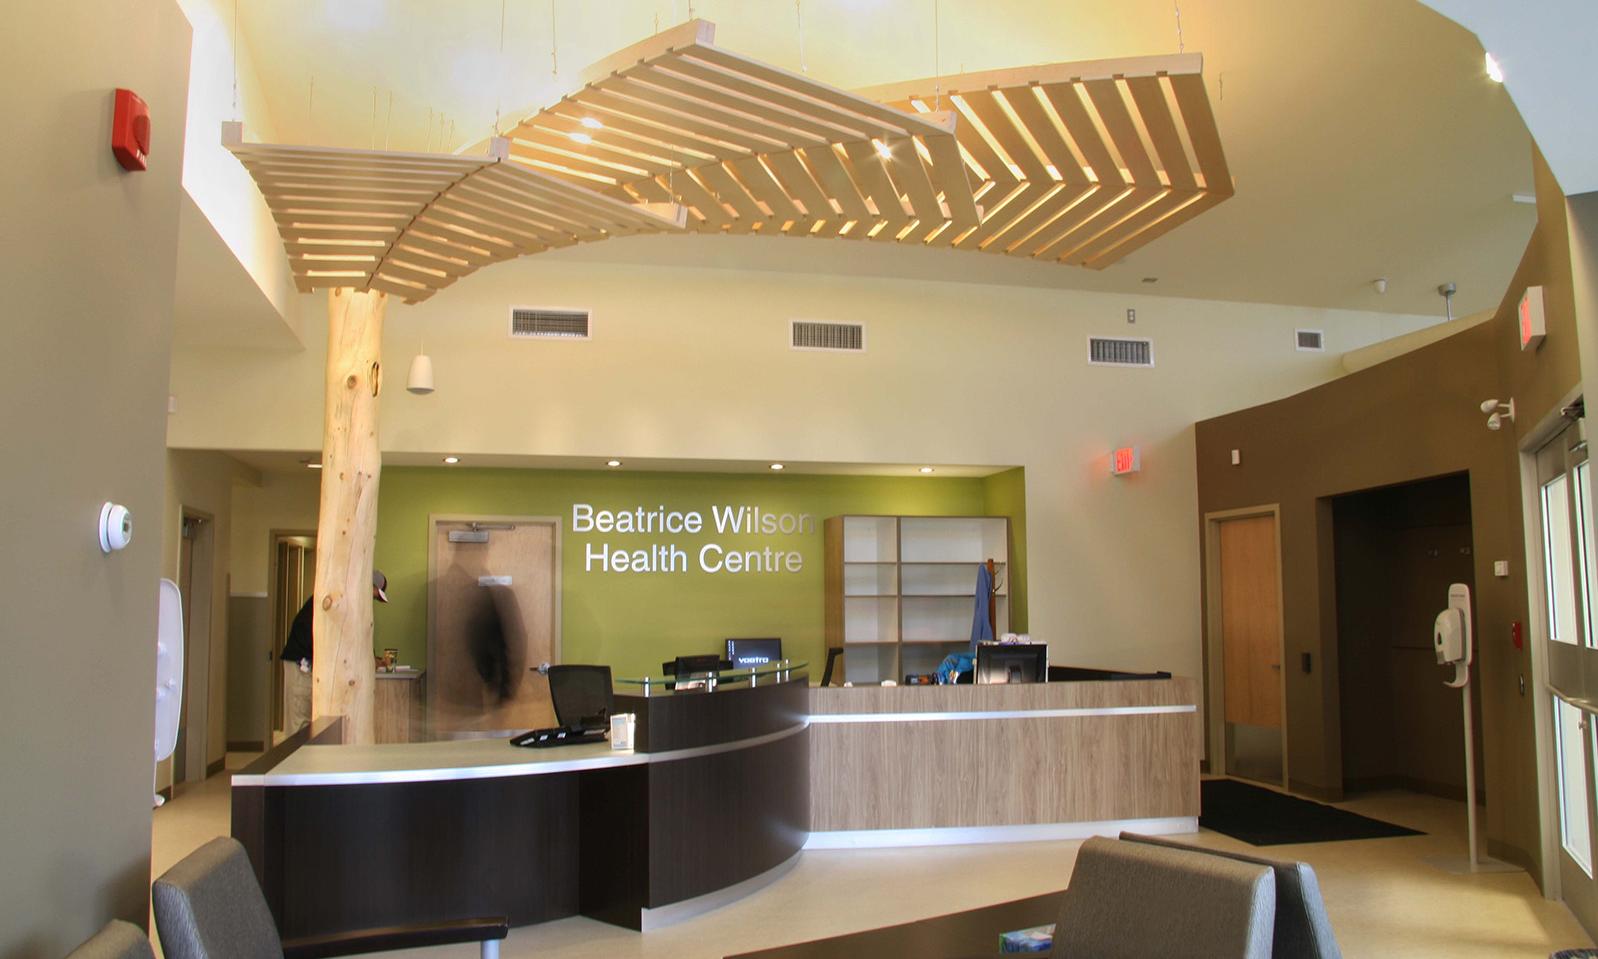 Beatrice Wilson Health Centre. Reception desk and waiting area. 